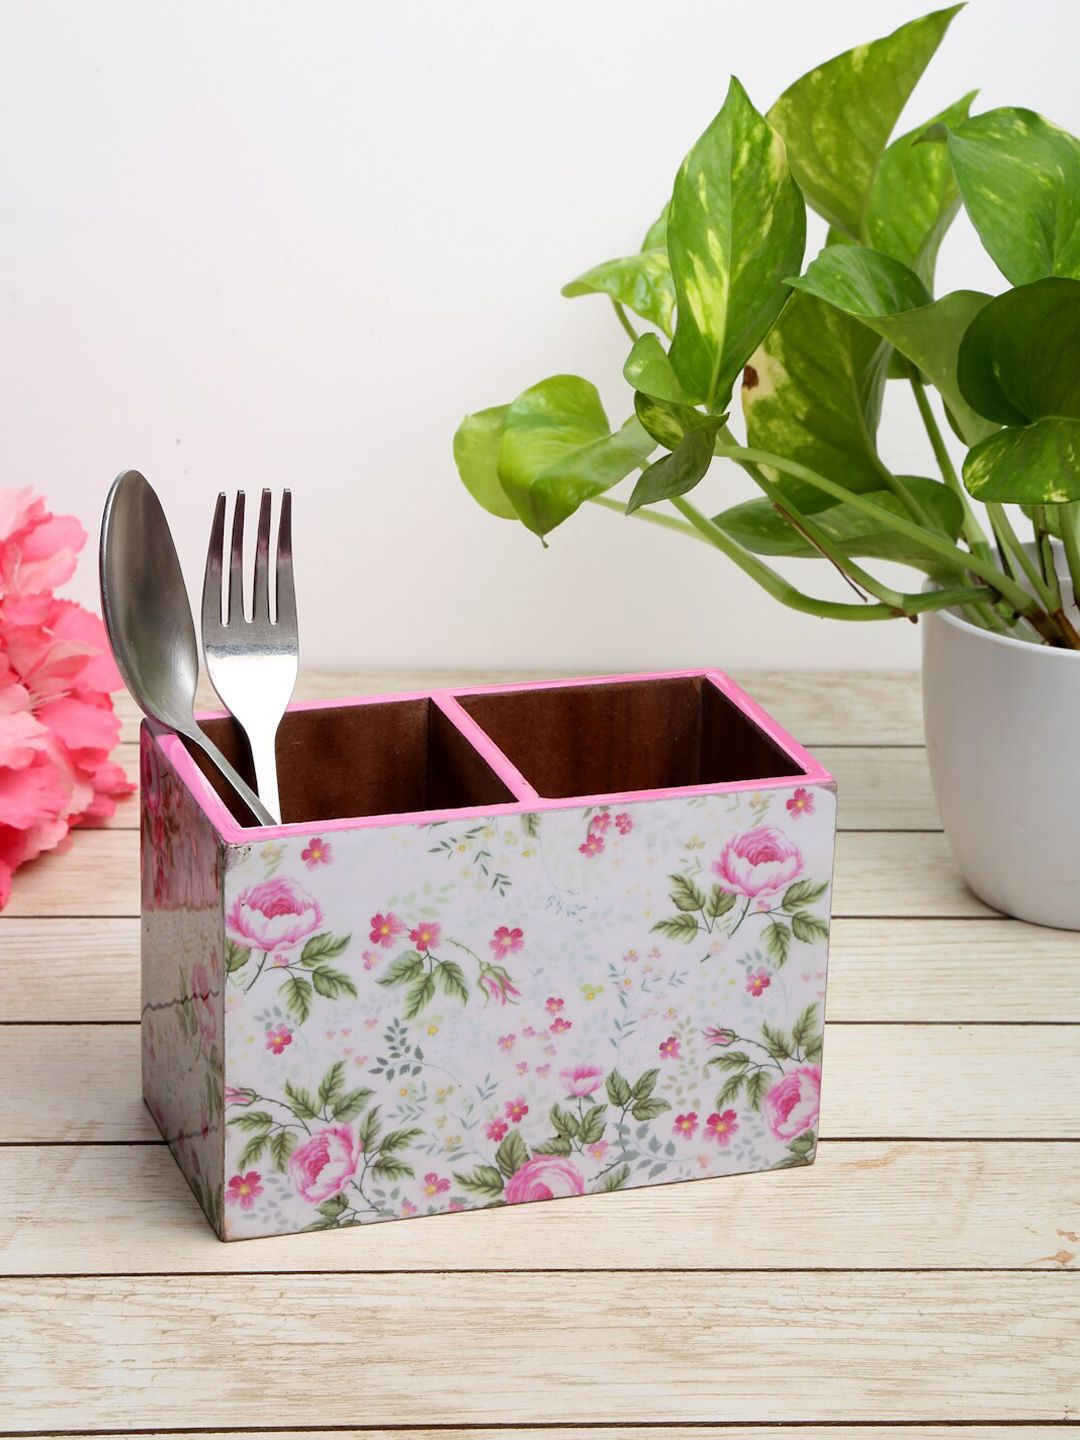 ROMEE White Printed Cutlery Holder With 2 Compartment Price in India